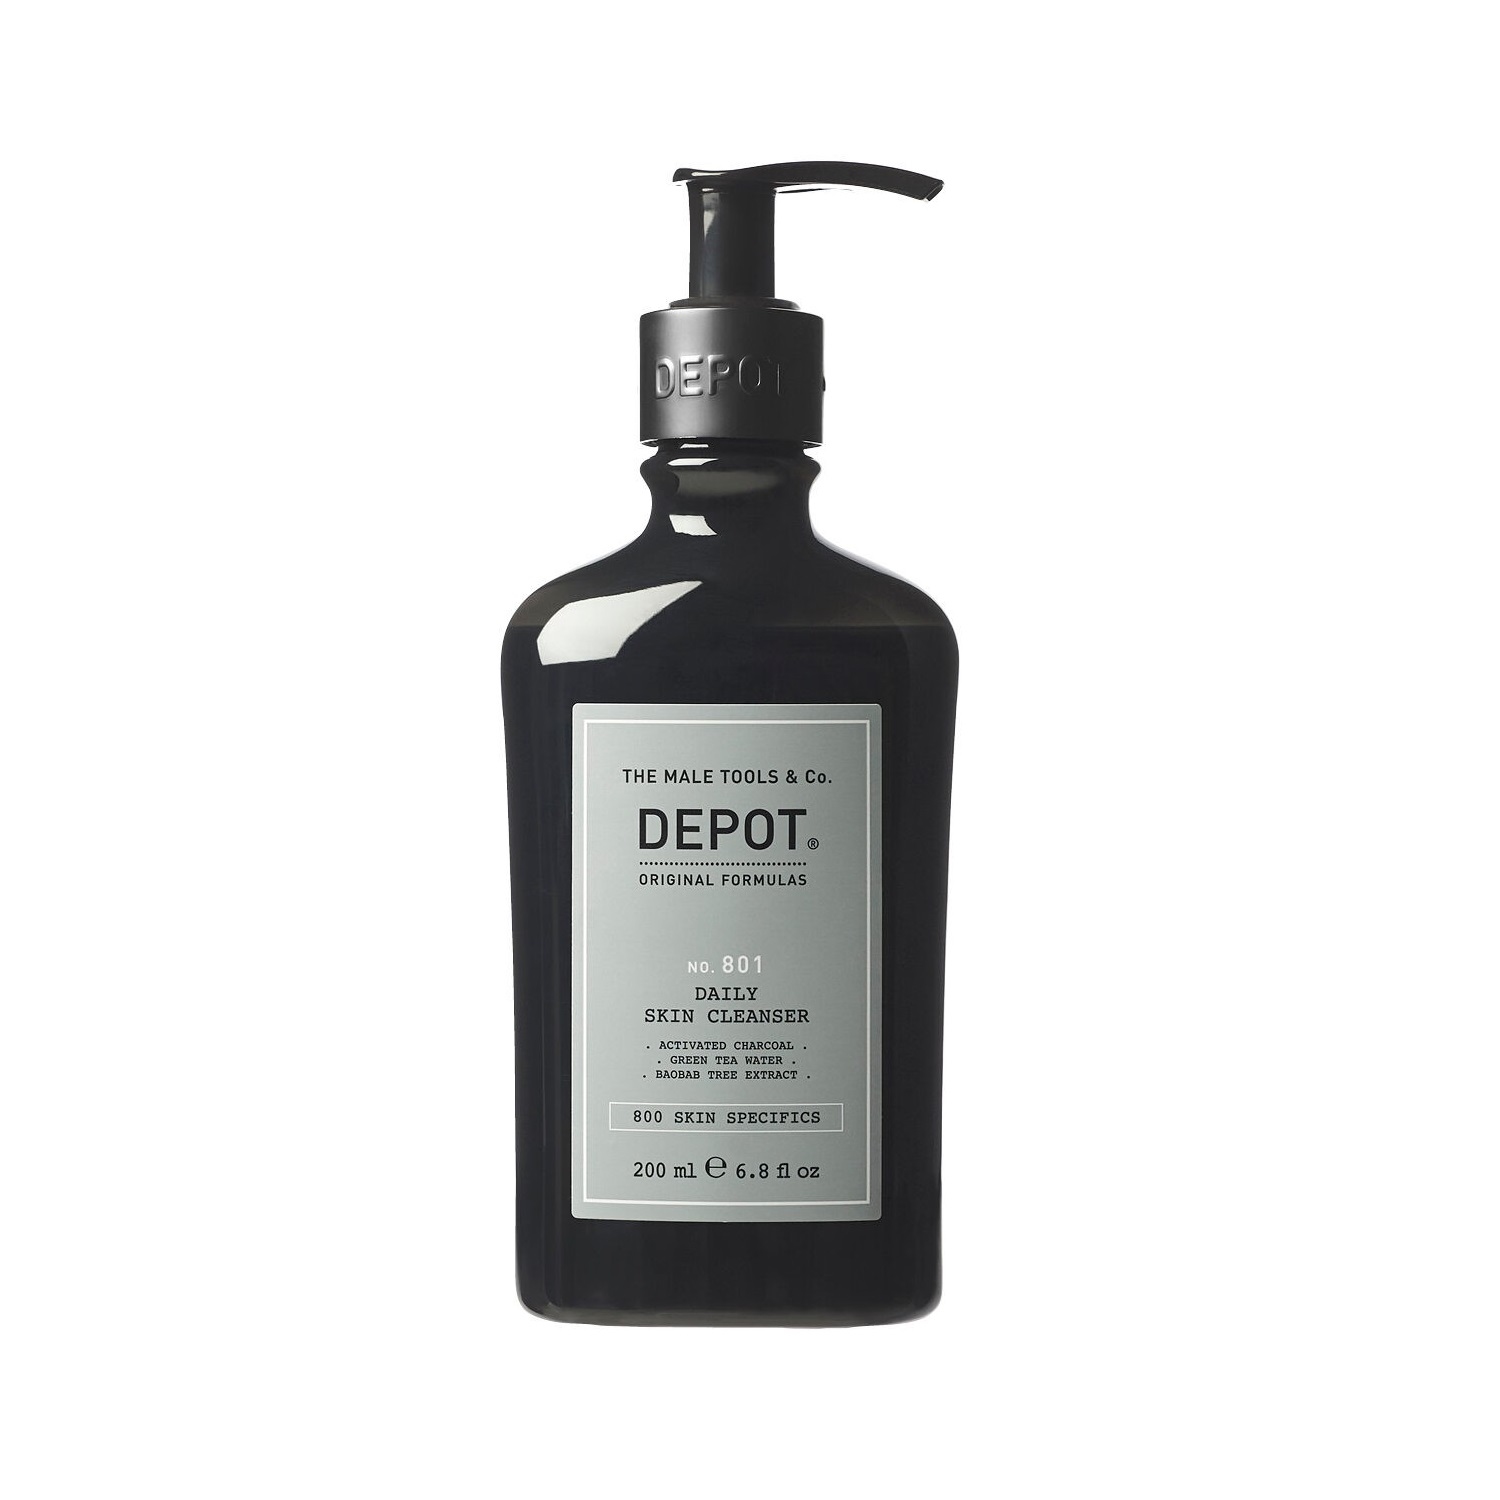 DEPOT No.801 DAILY SKIN CLEANSER